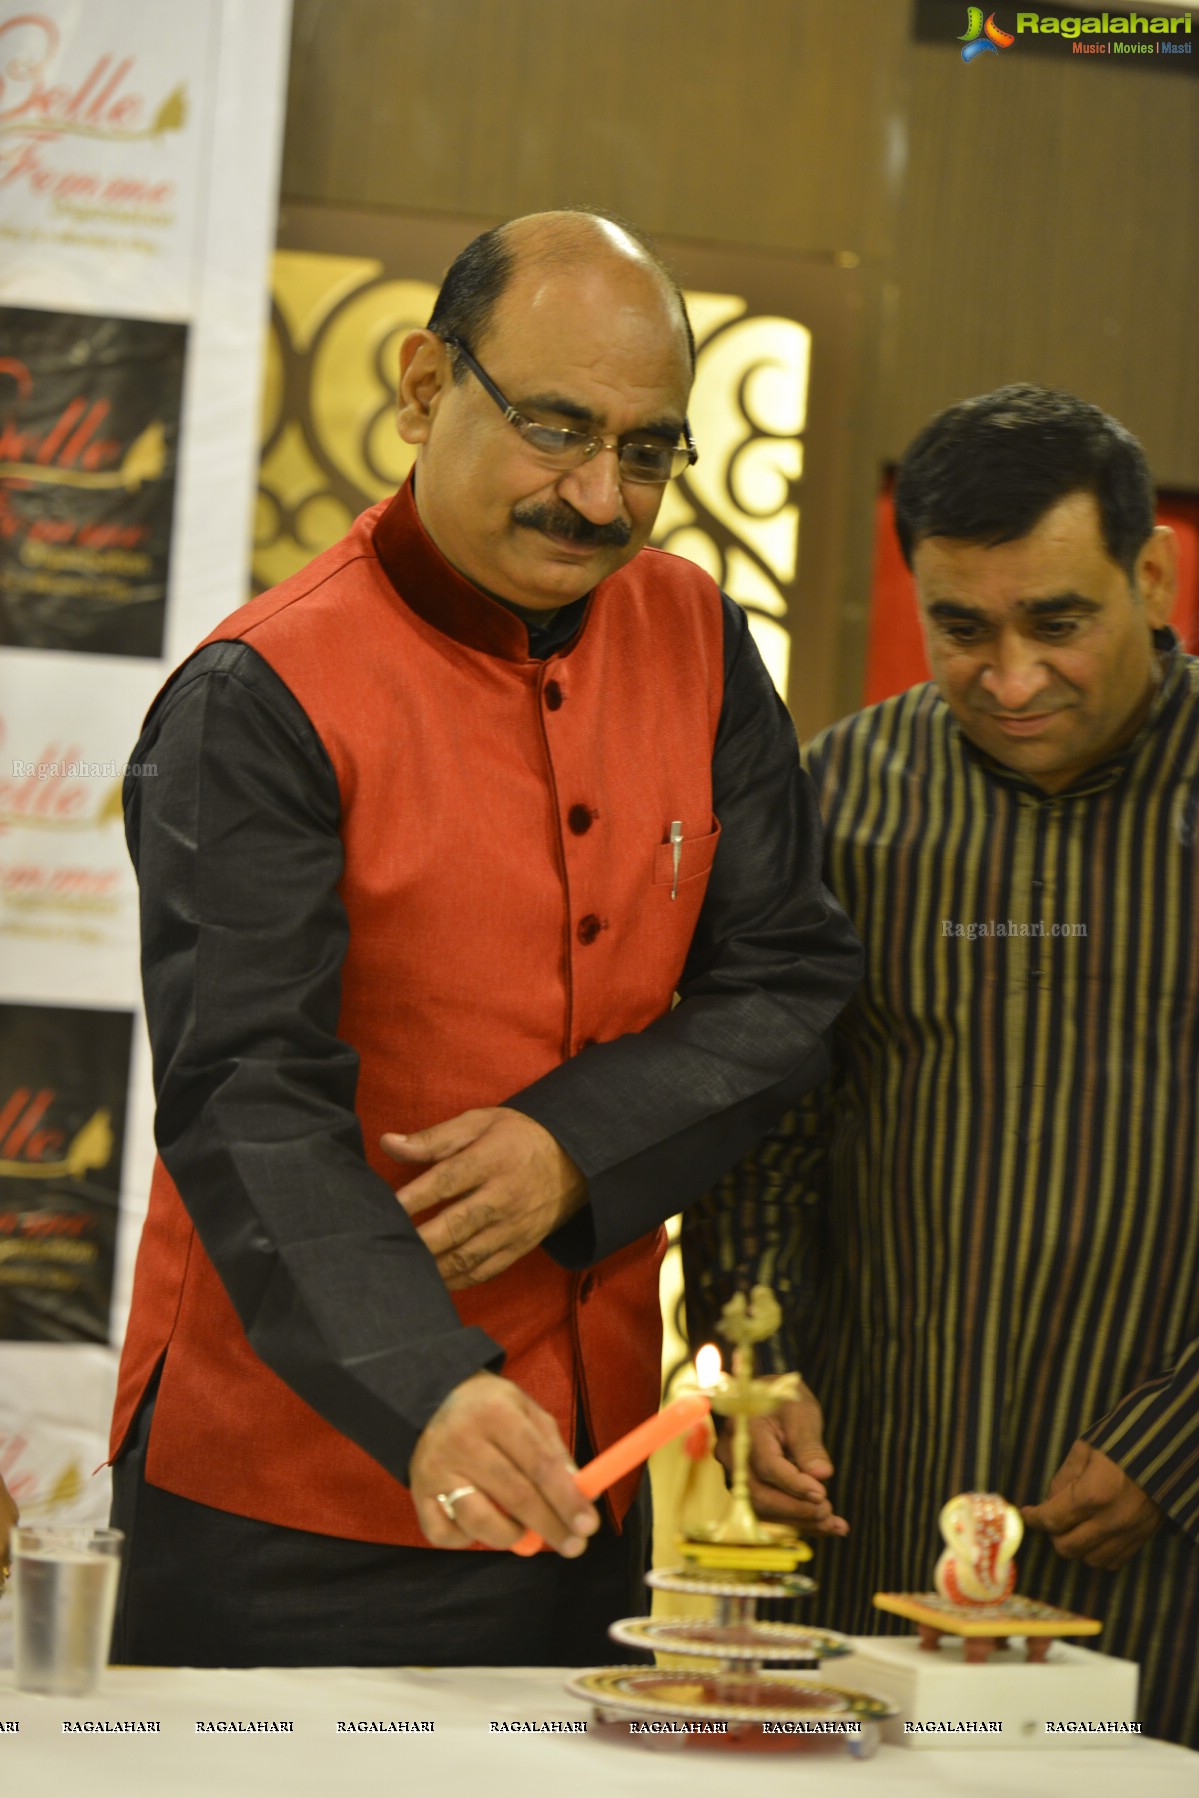 Evening of Poetry by Madan Mohan Samar and Comedy by Sandip Sharma - Organized by The Belle Femme, Hyderabad